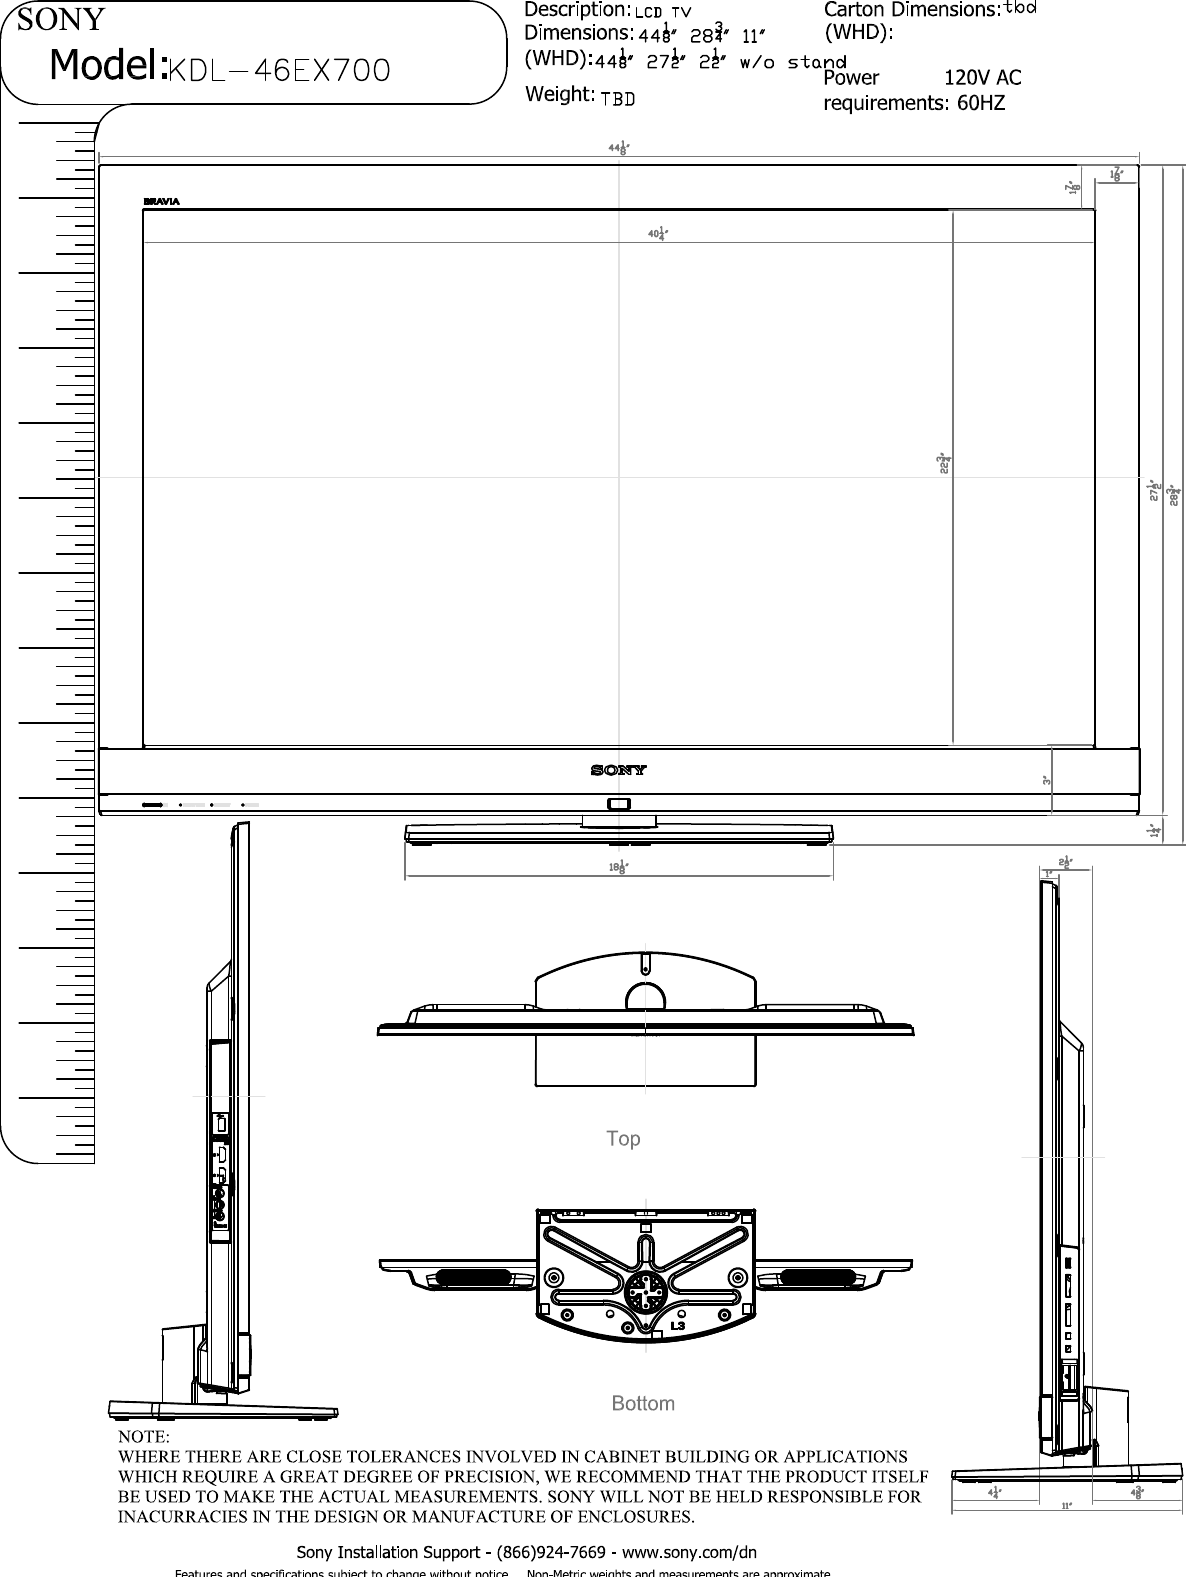 Page 1 of 3 - Sony KDL-46EX700 Layout1  User Manual Dimensions Diagram KDL46EX700 Cutsheet